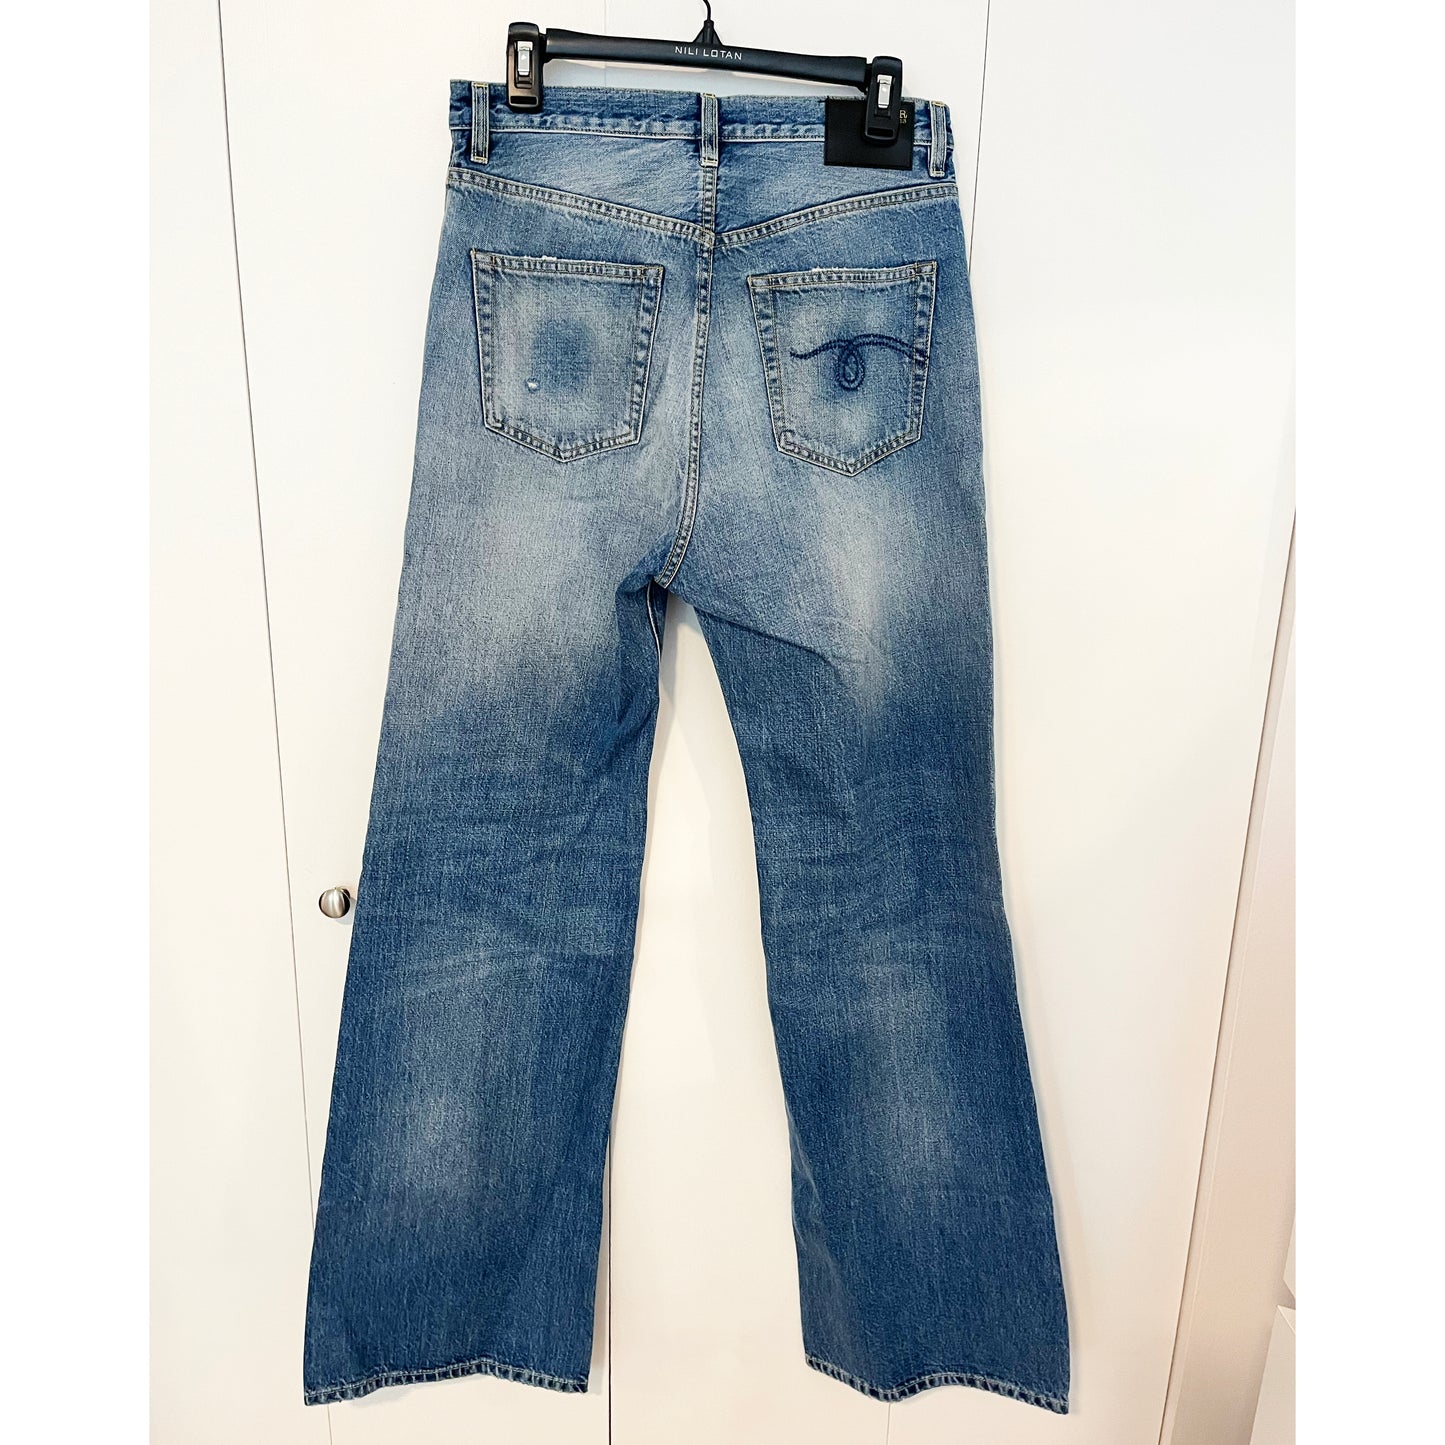 R13 "Jane" Jeans in Irving Blue, size 31